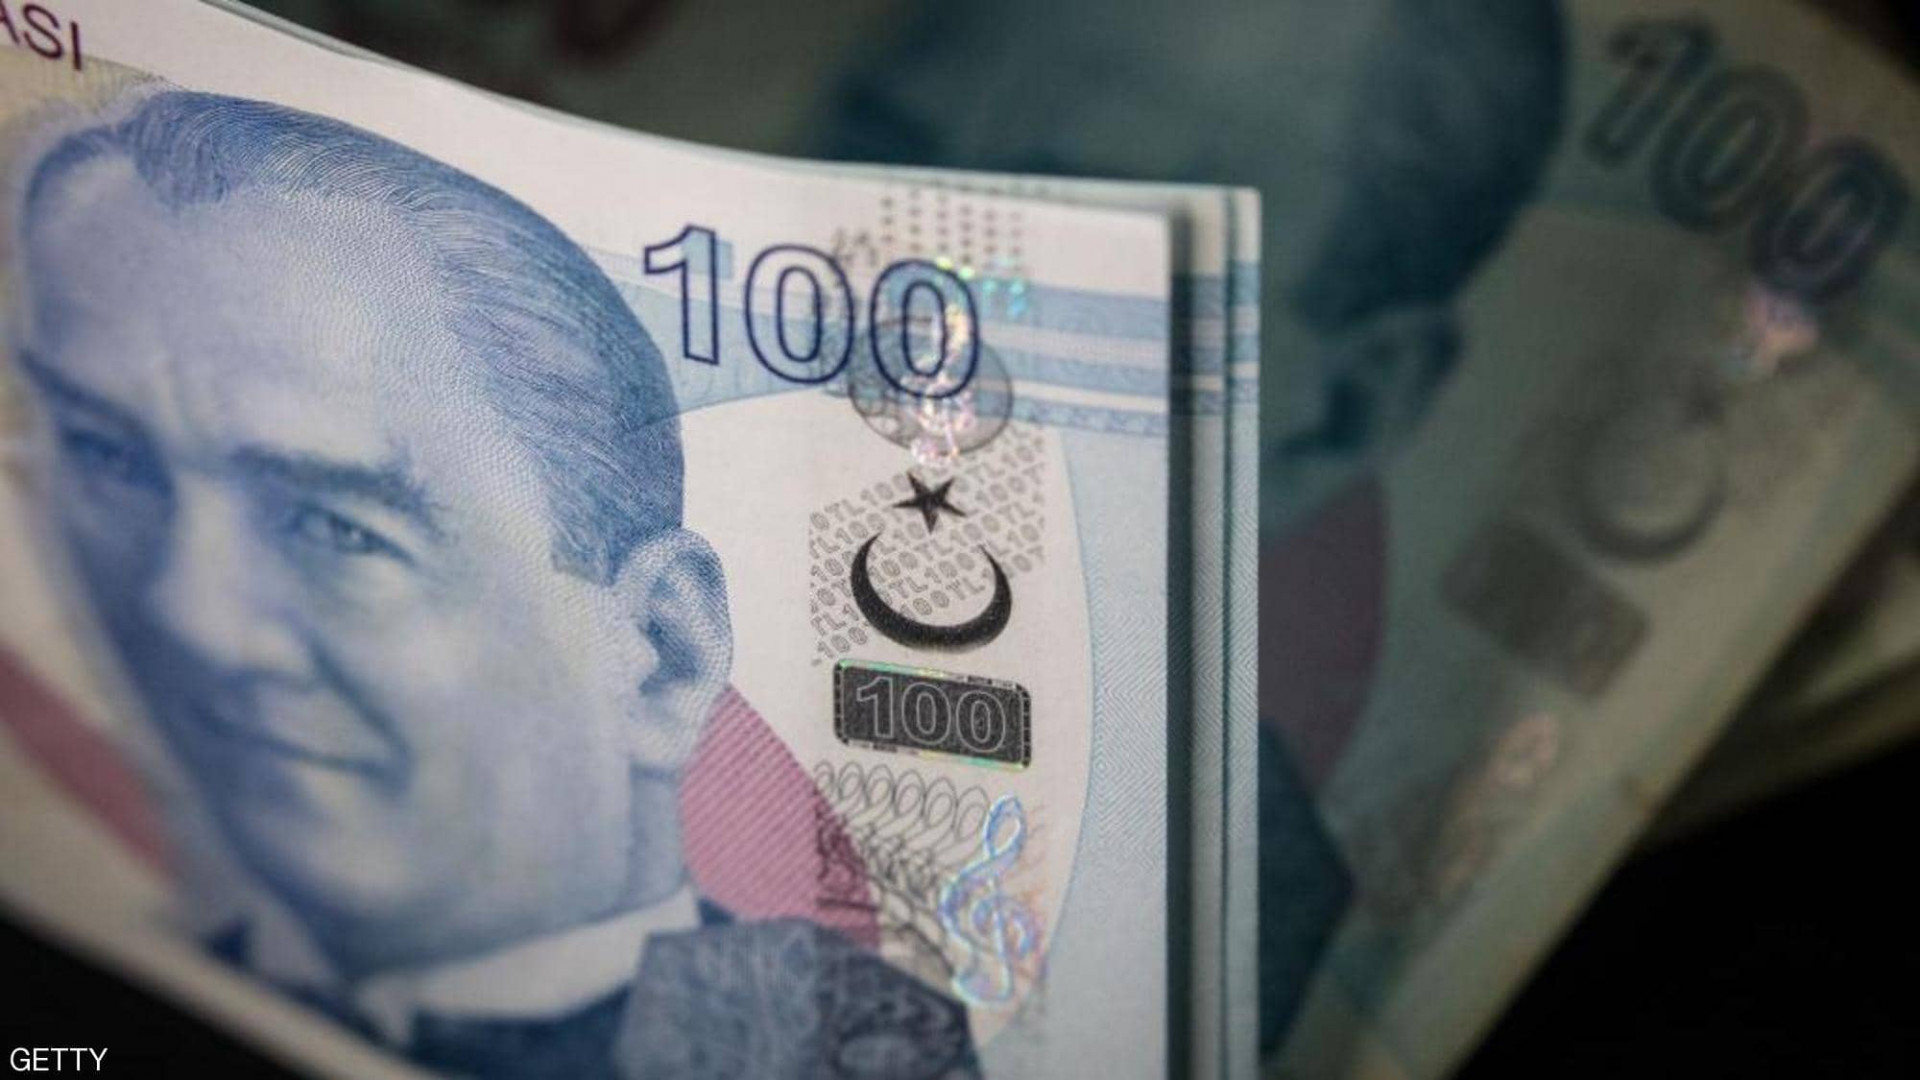 Turkish inflation rate drops unexpectedly to 16.59% in May